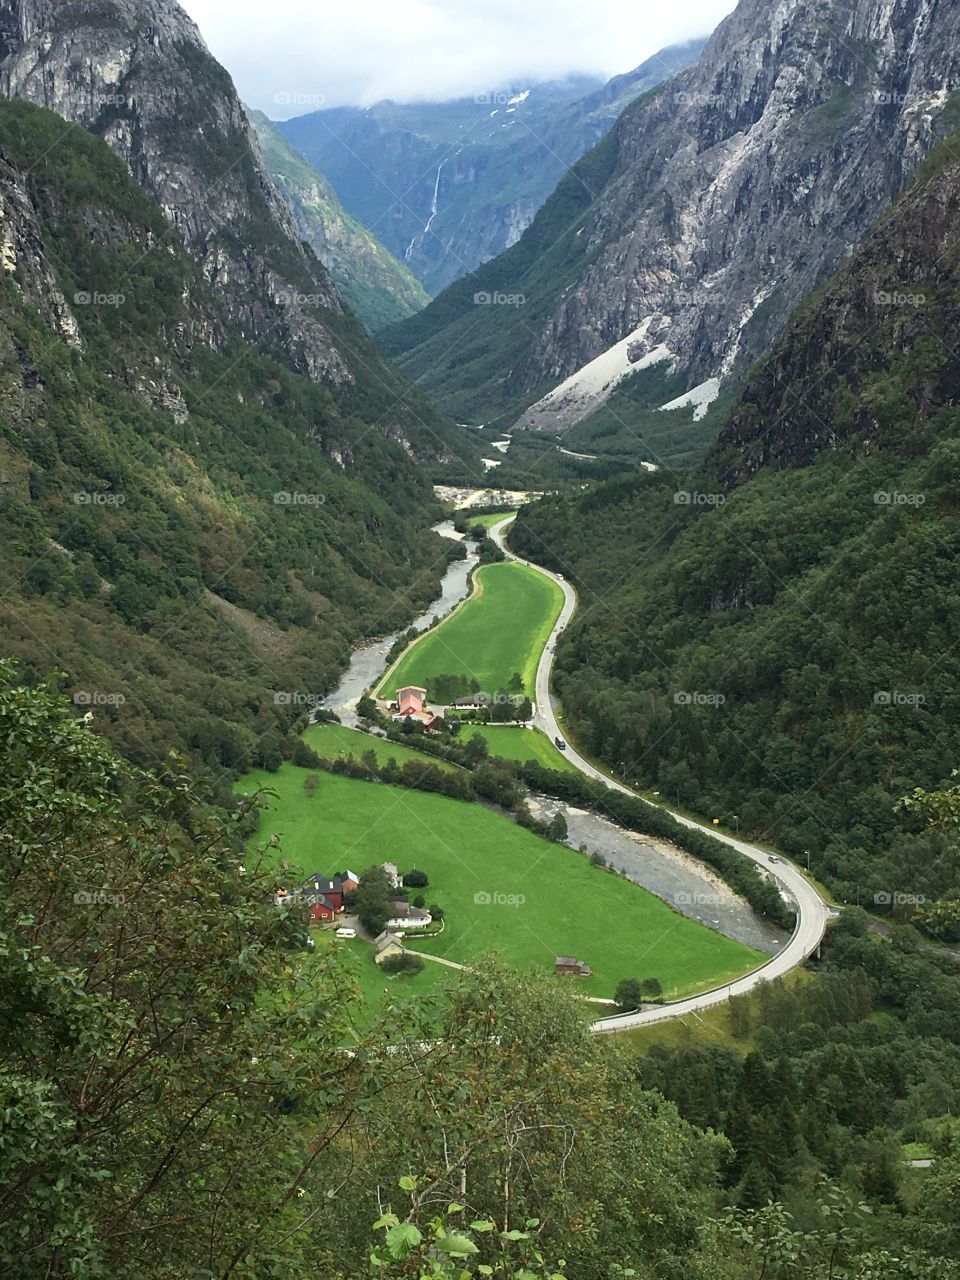 View from the mountain. Norway 